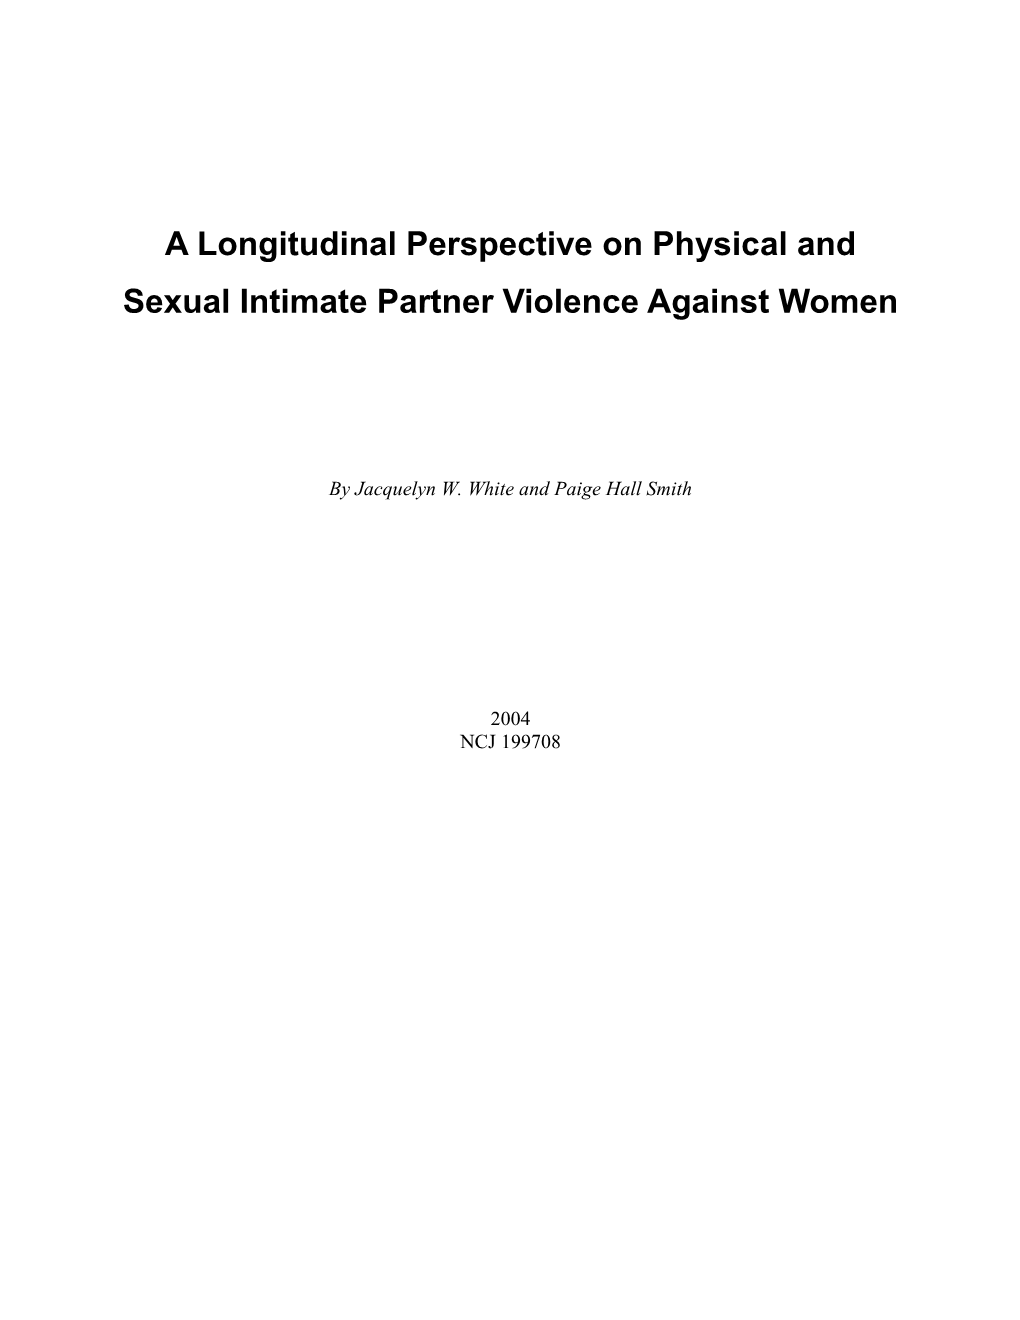 A Longitudinal Perspective on Physical and Sexual Intimate Partner Violence Against Women